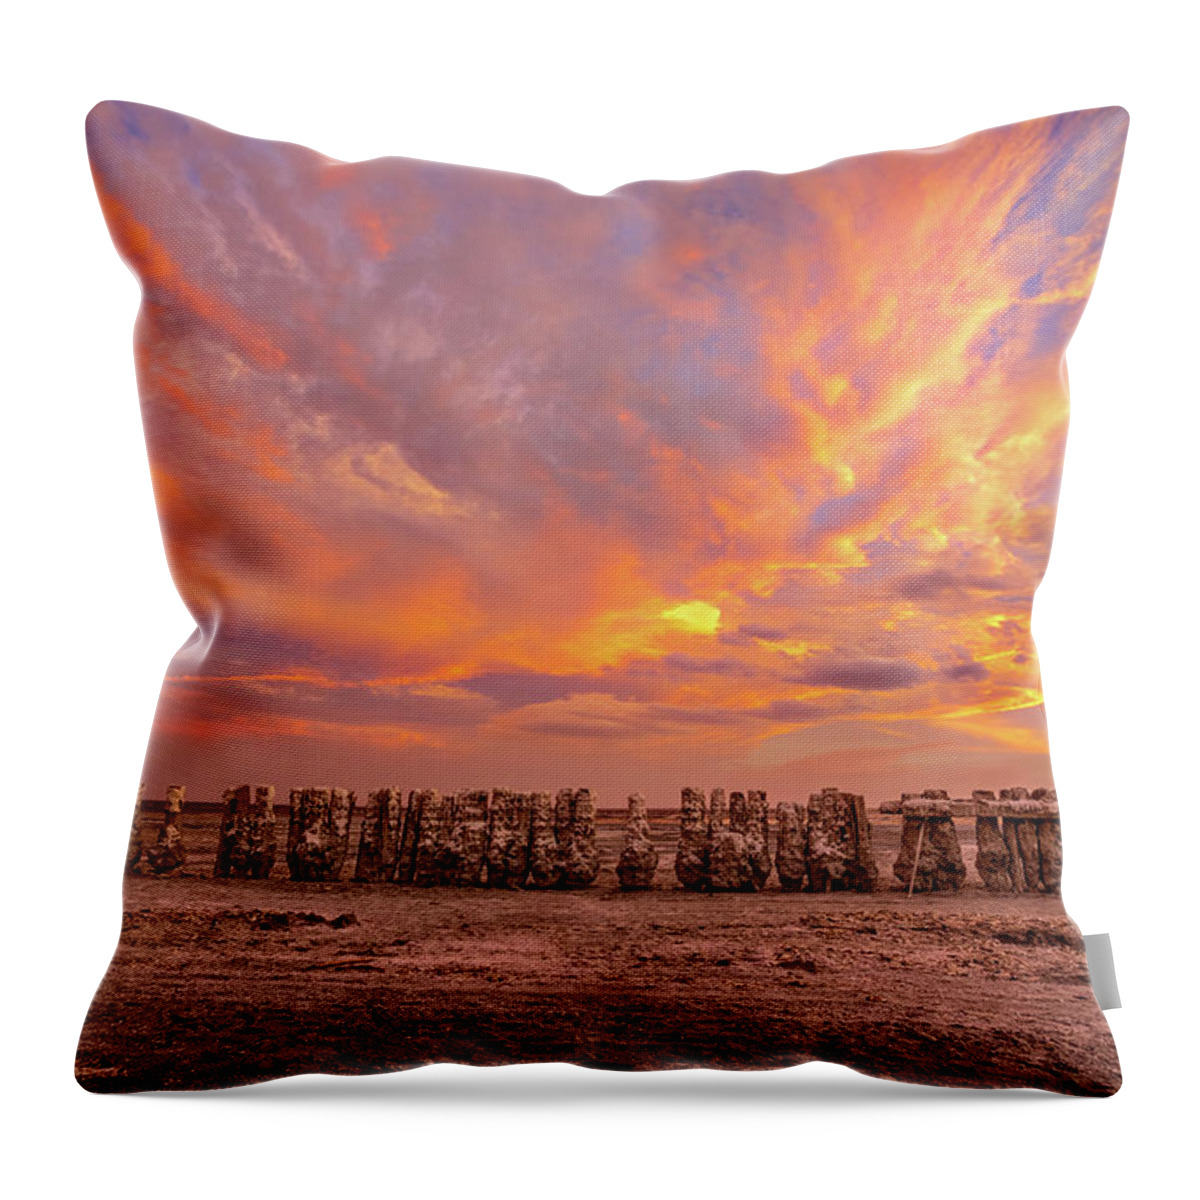 Abandoned Throw Pillow featuring the photograph Ducks in a Row by Peter Tellone